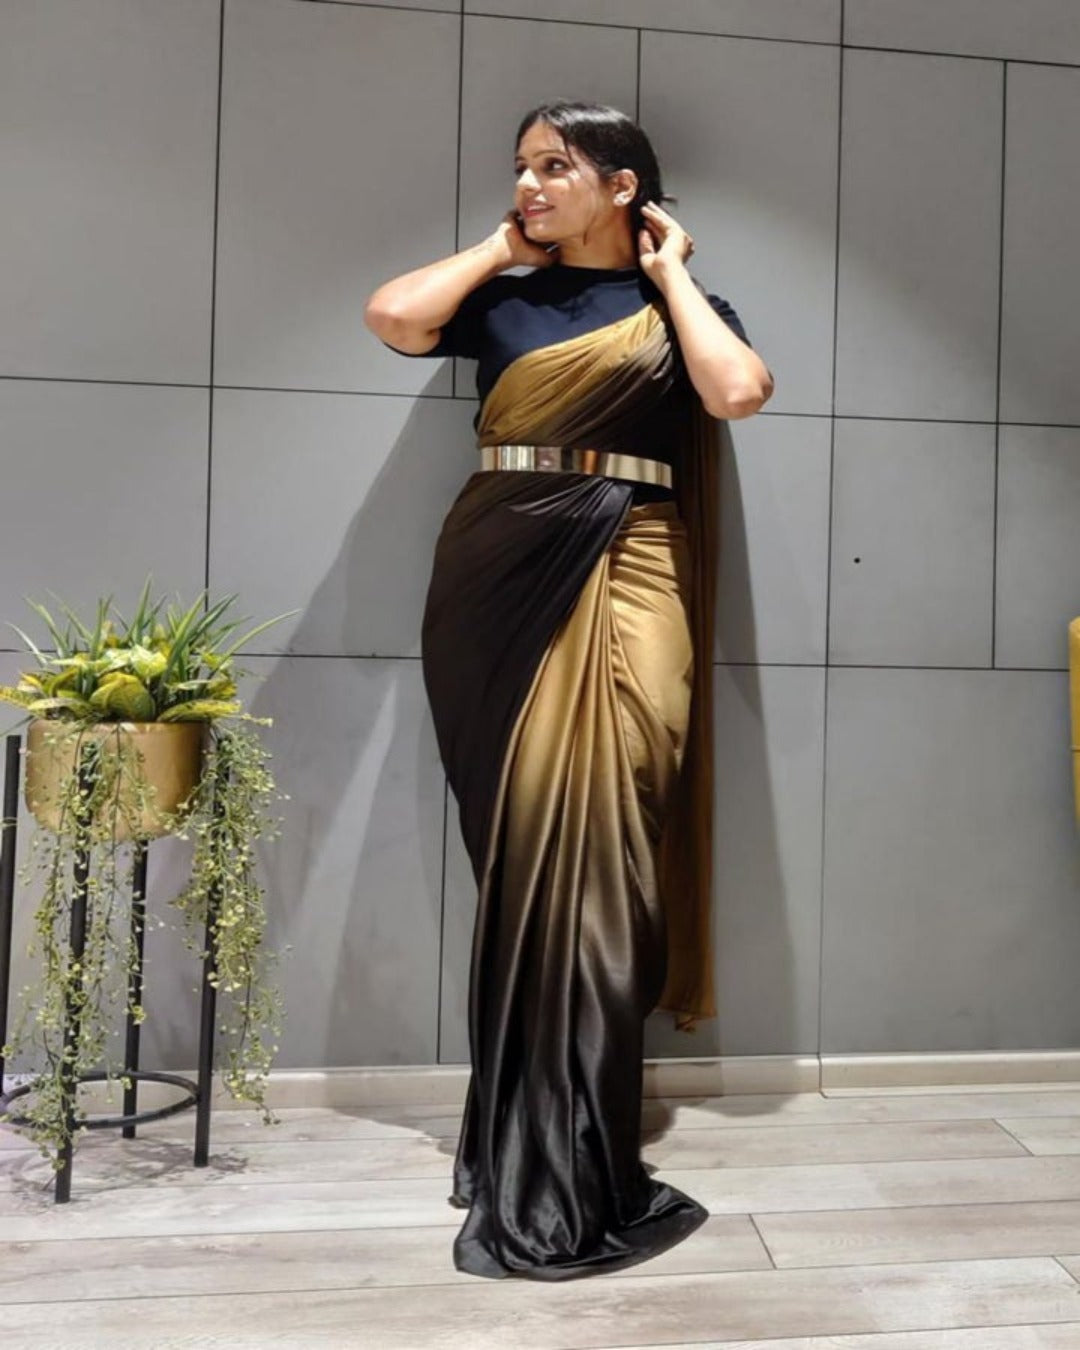 Ready To Wear Chiffon Saree With Metal Belt at Rs 1799.00